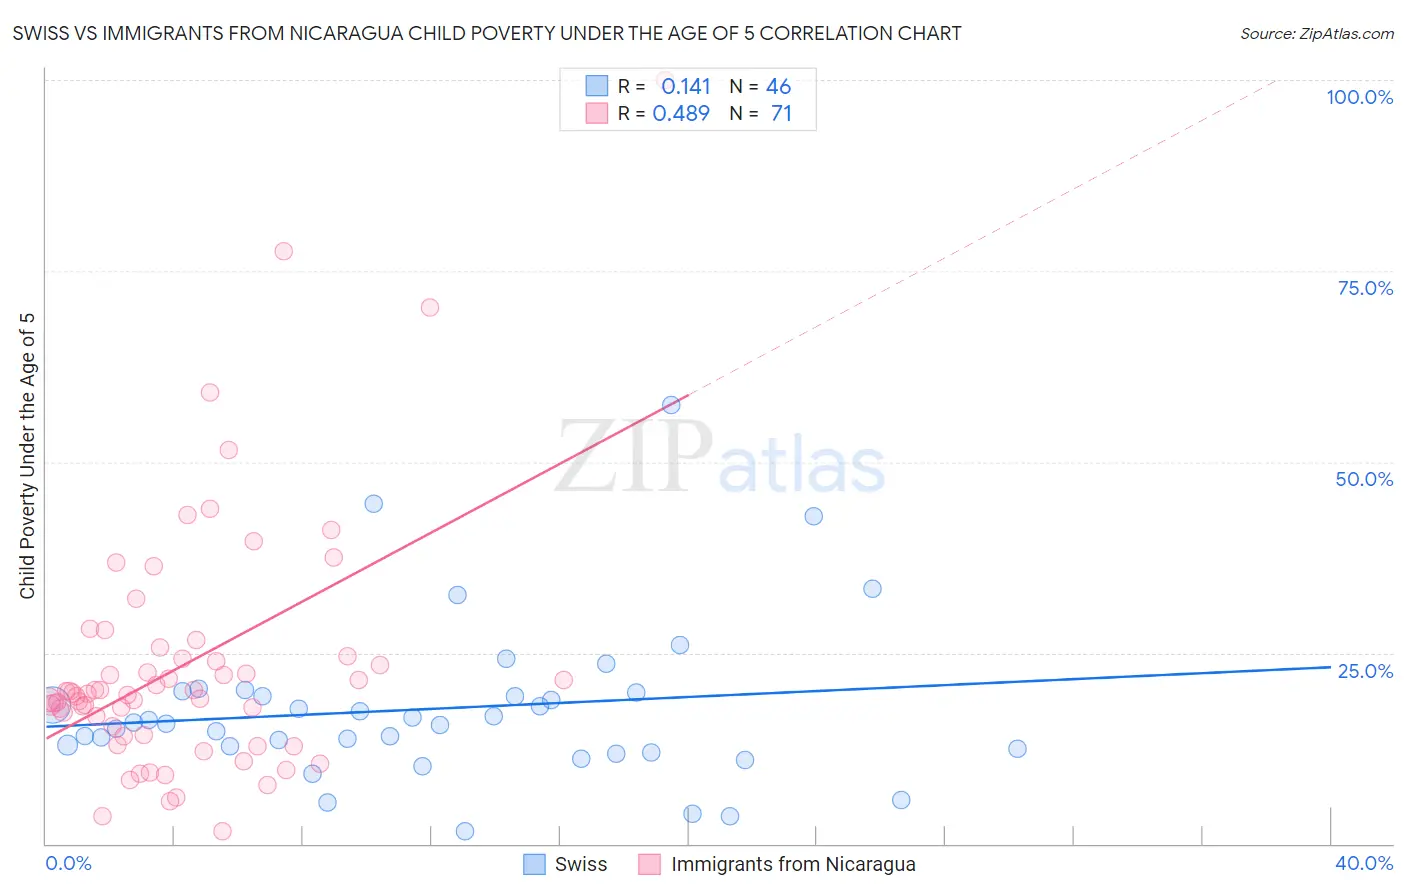 Swiss vs Immigrants from Nicaragua Child Poverty Under the Age of 5